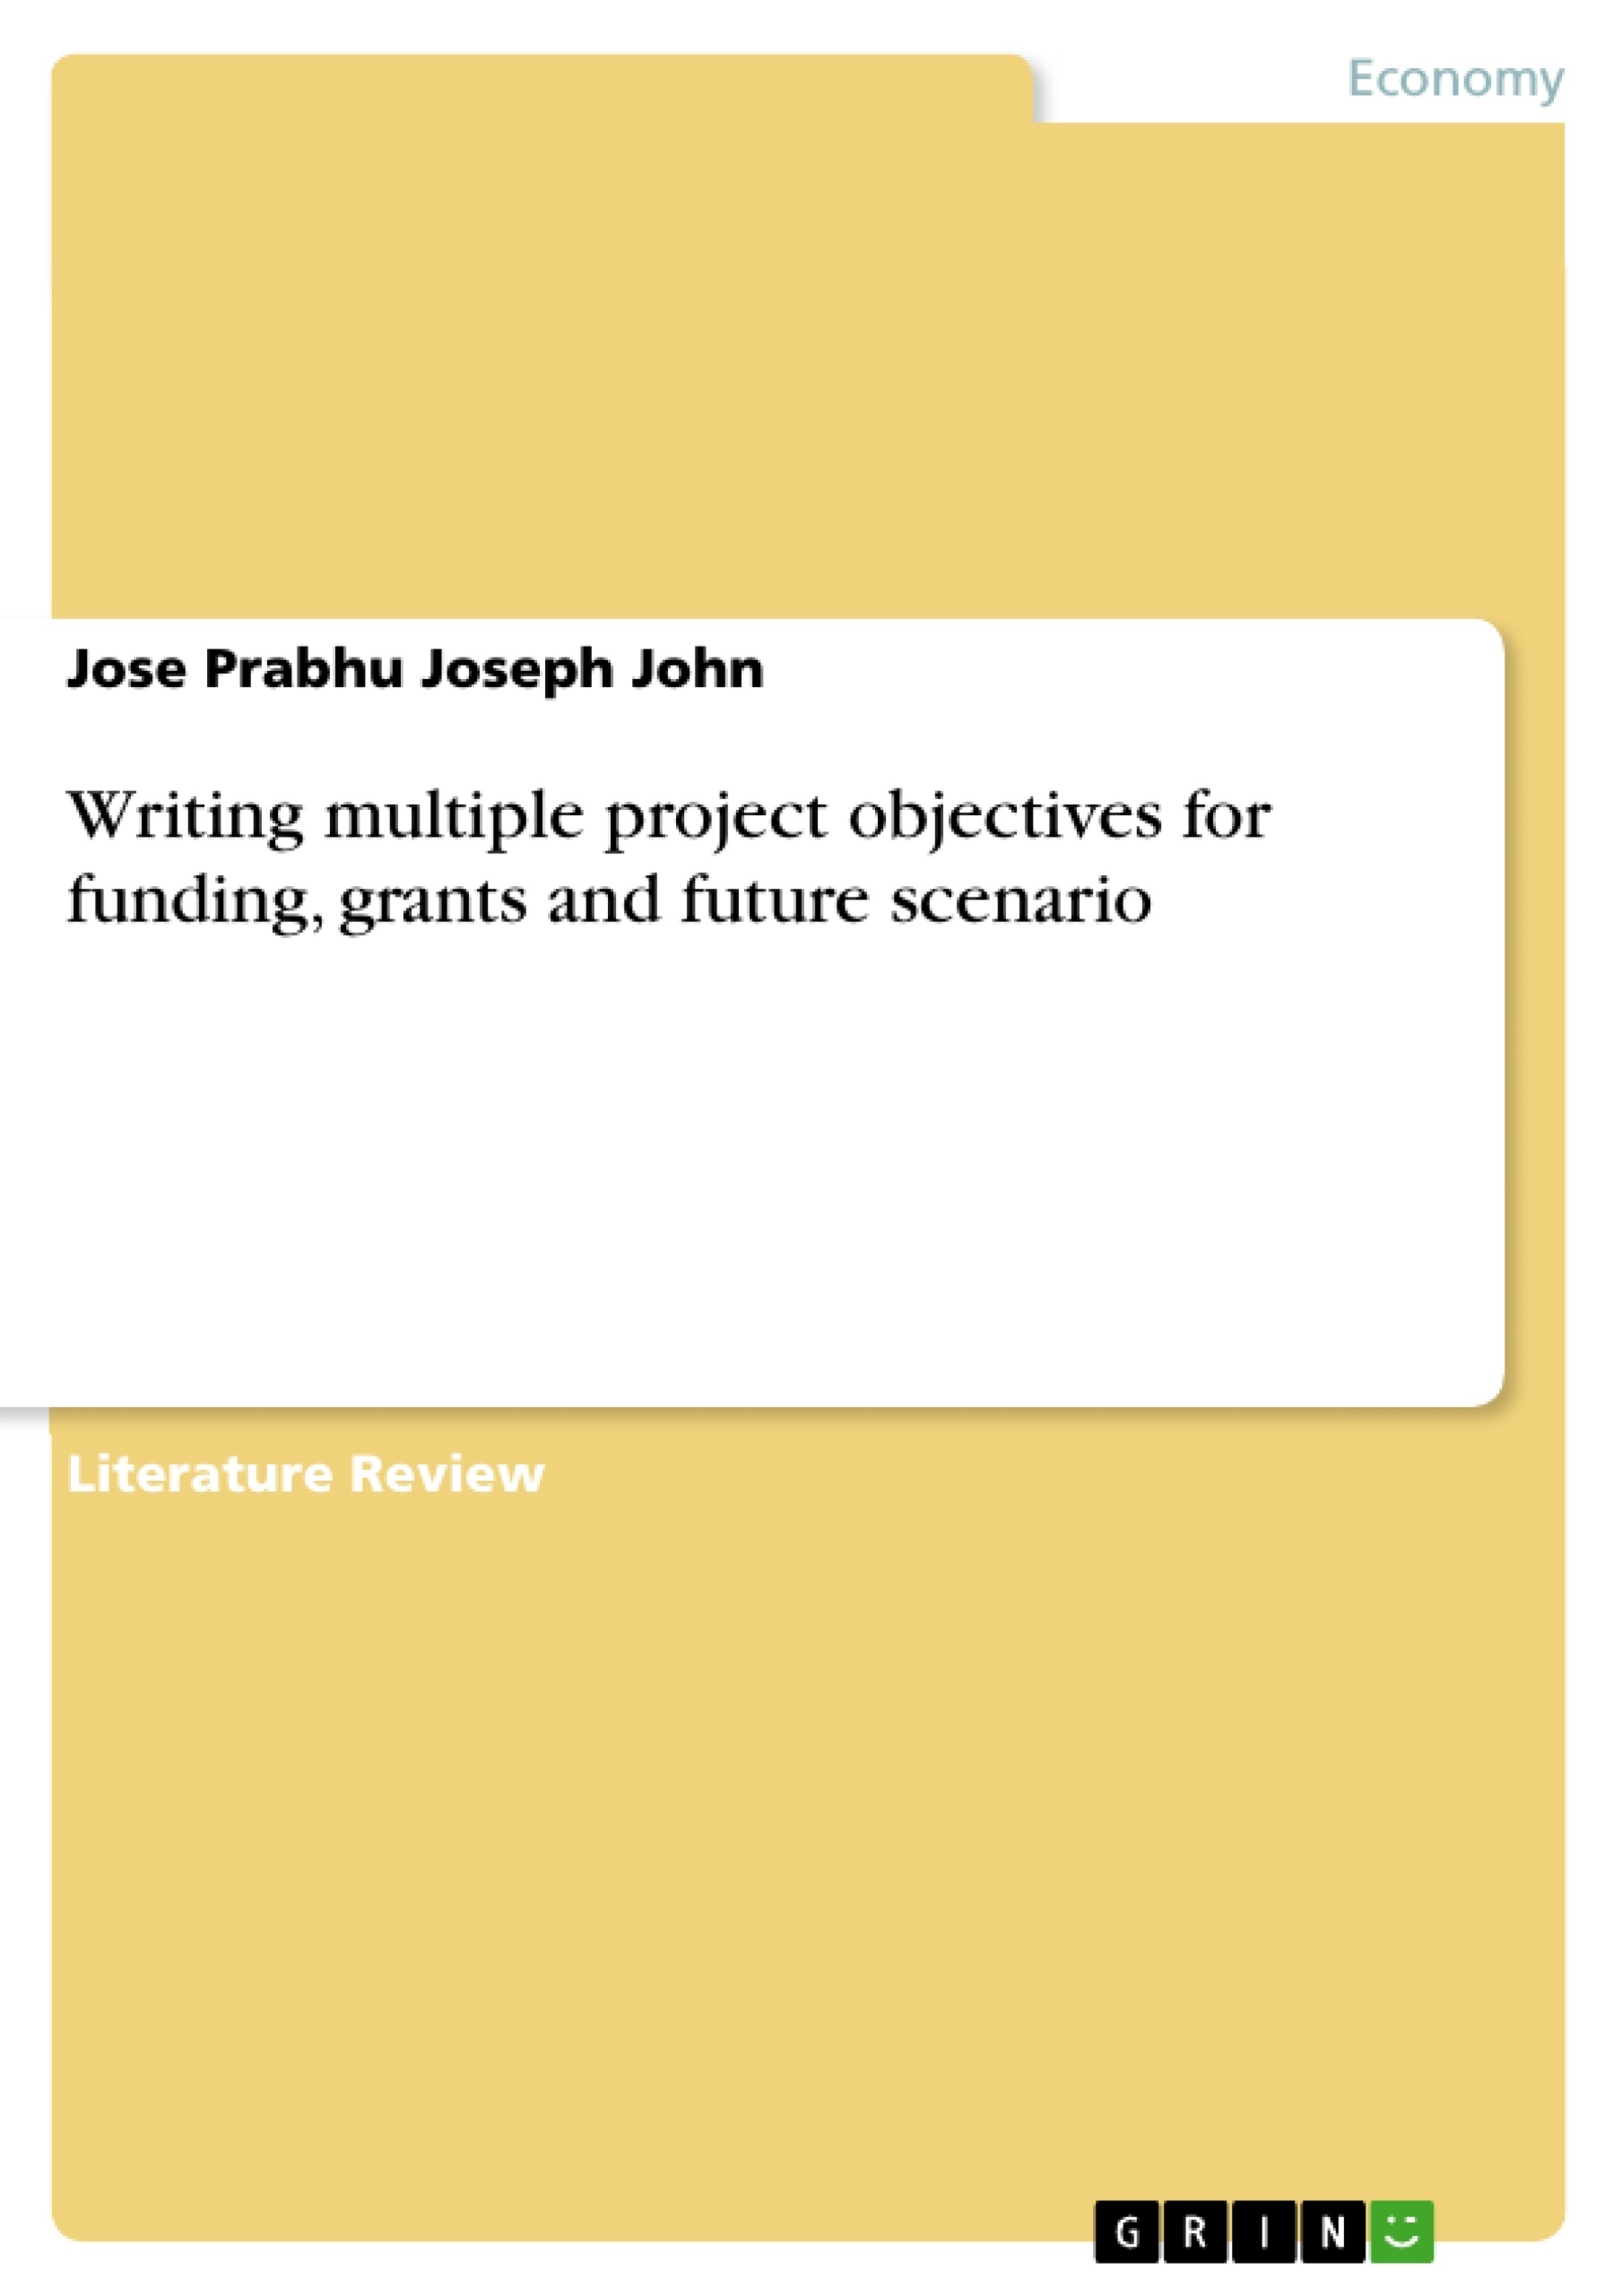 Título: Writing multiple project objectives for funding, grants and future scenario